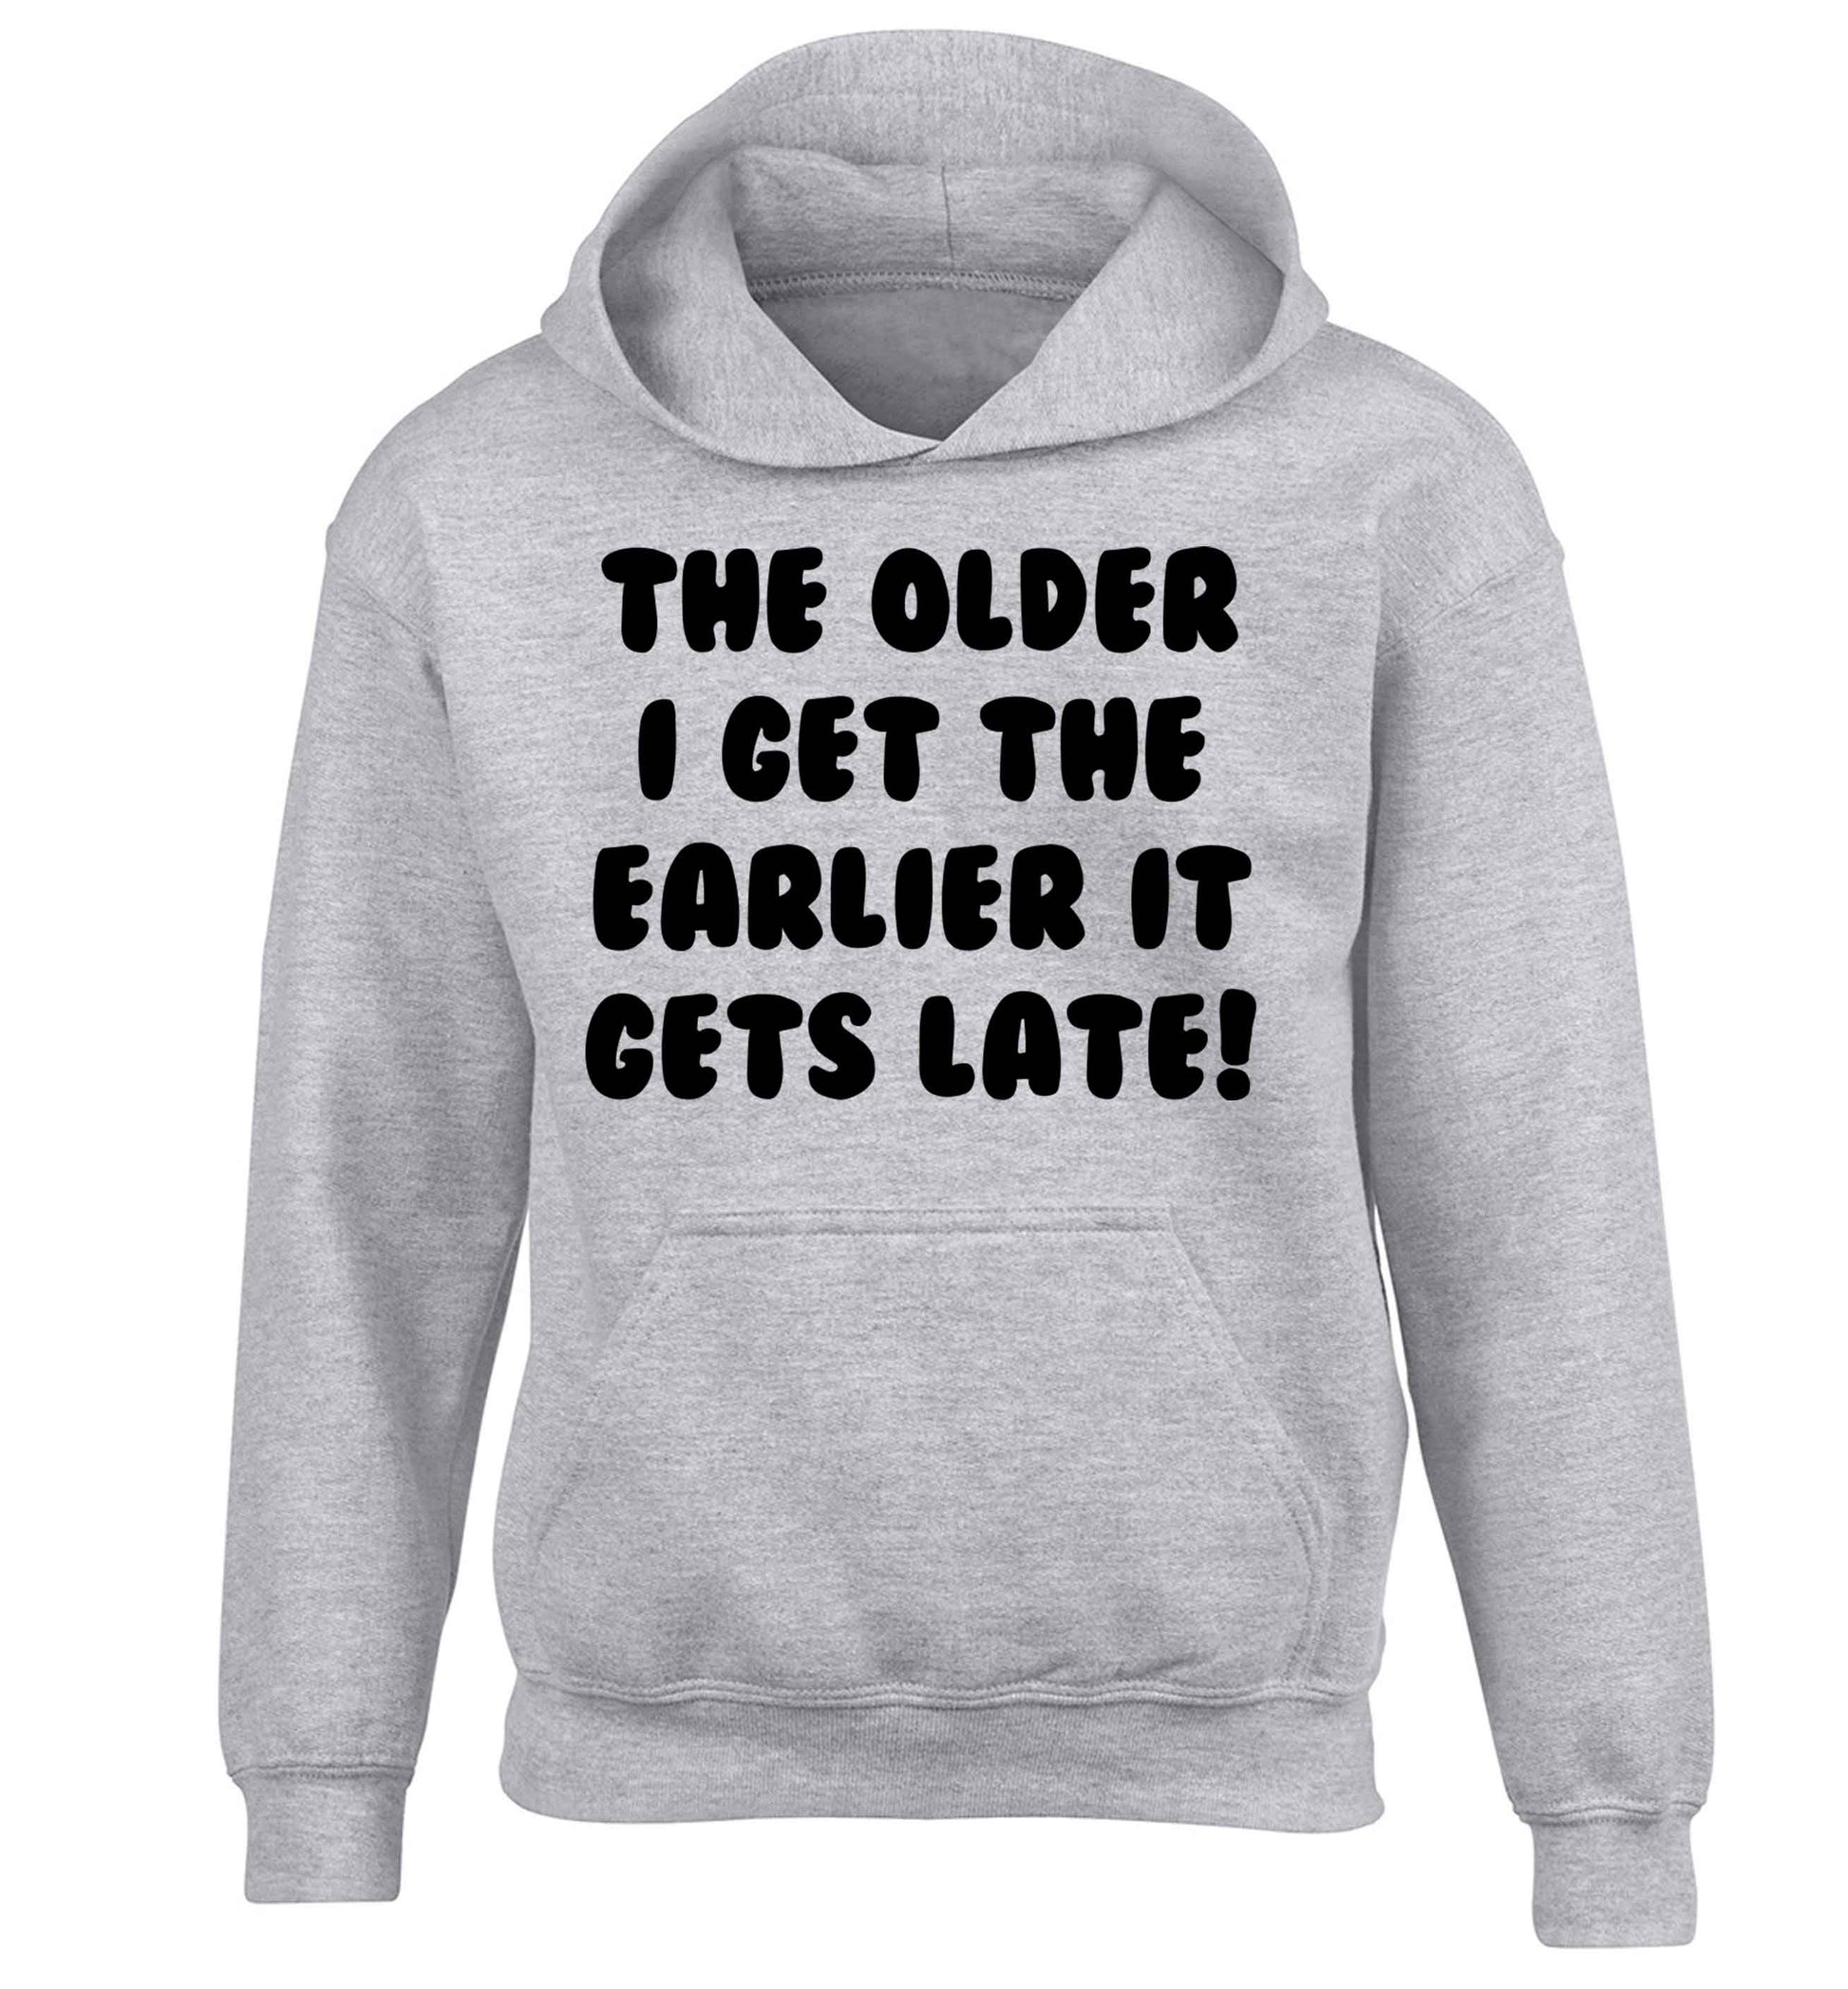 The older I get the earlier it gets late! children's grey hoodie 12-13 Years